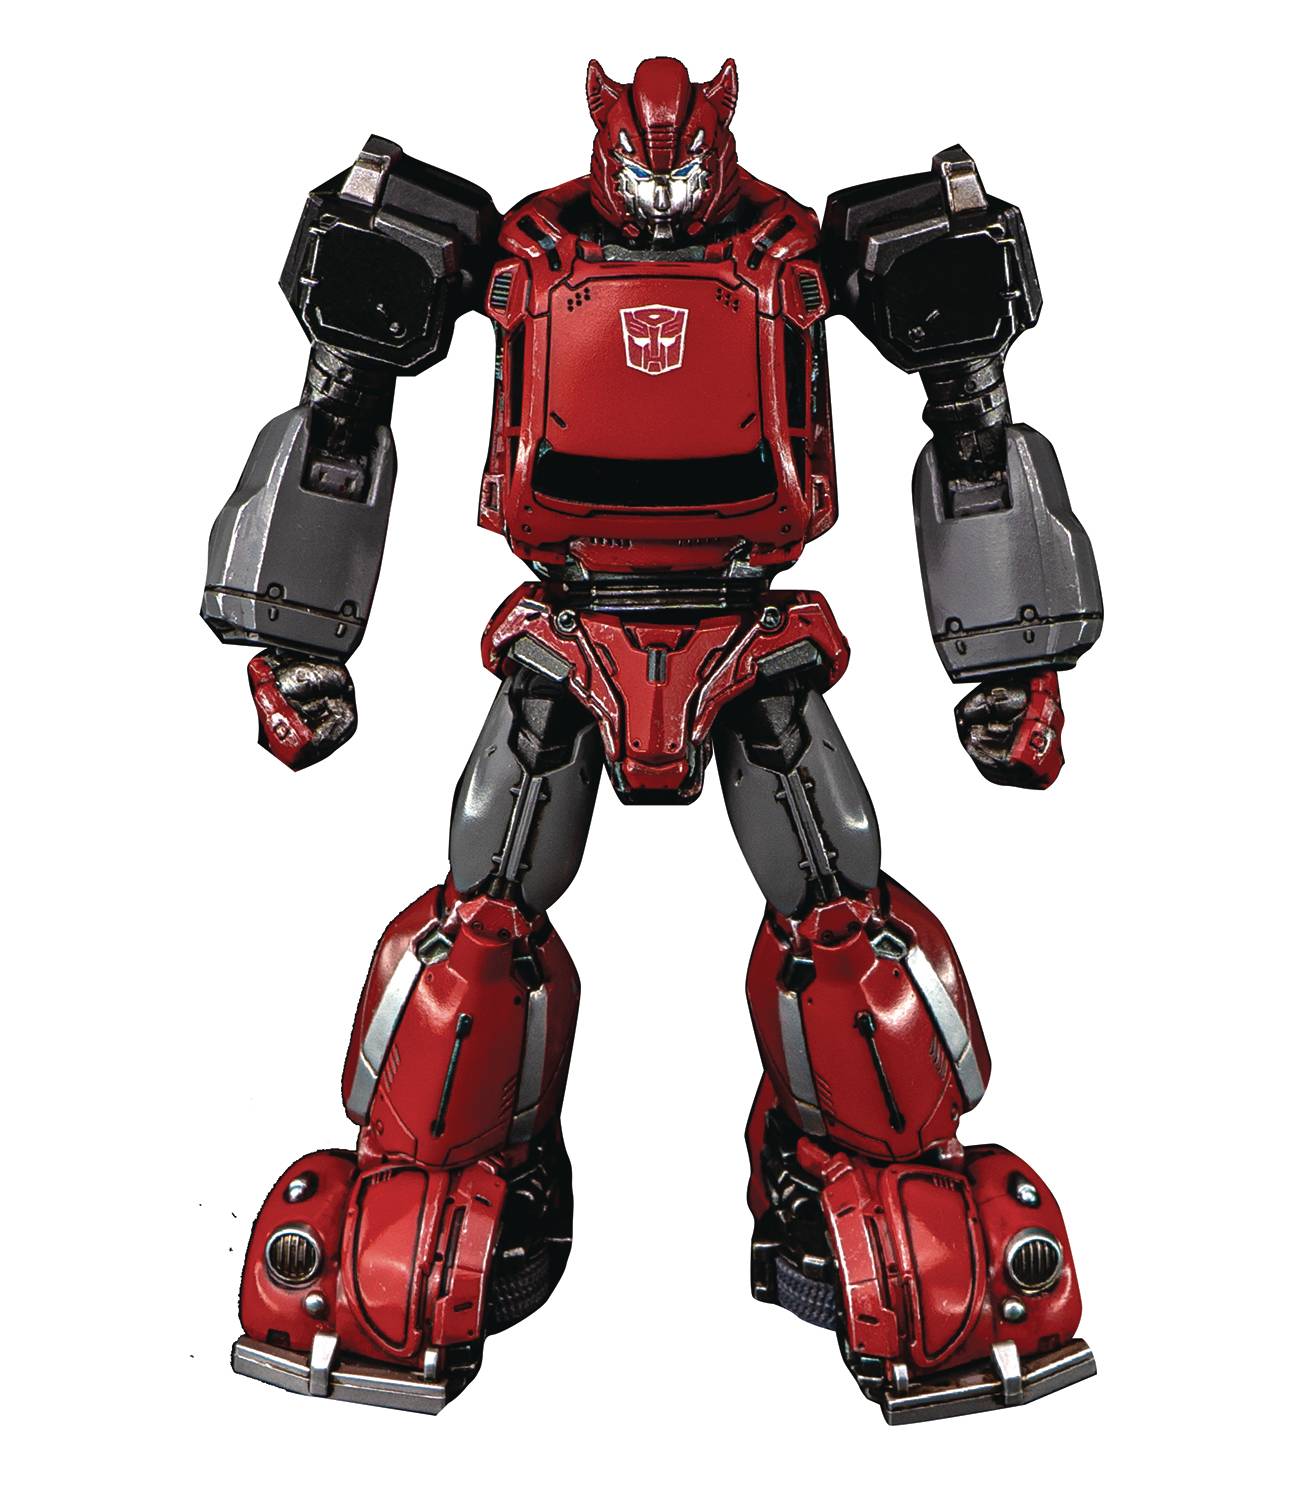 TRANSFORMERS MDLX CLIFFJUMPER PX SMALL SCALE ARTICULATED FIG